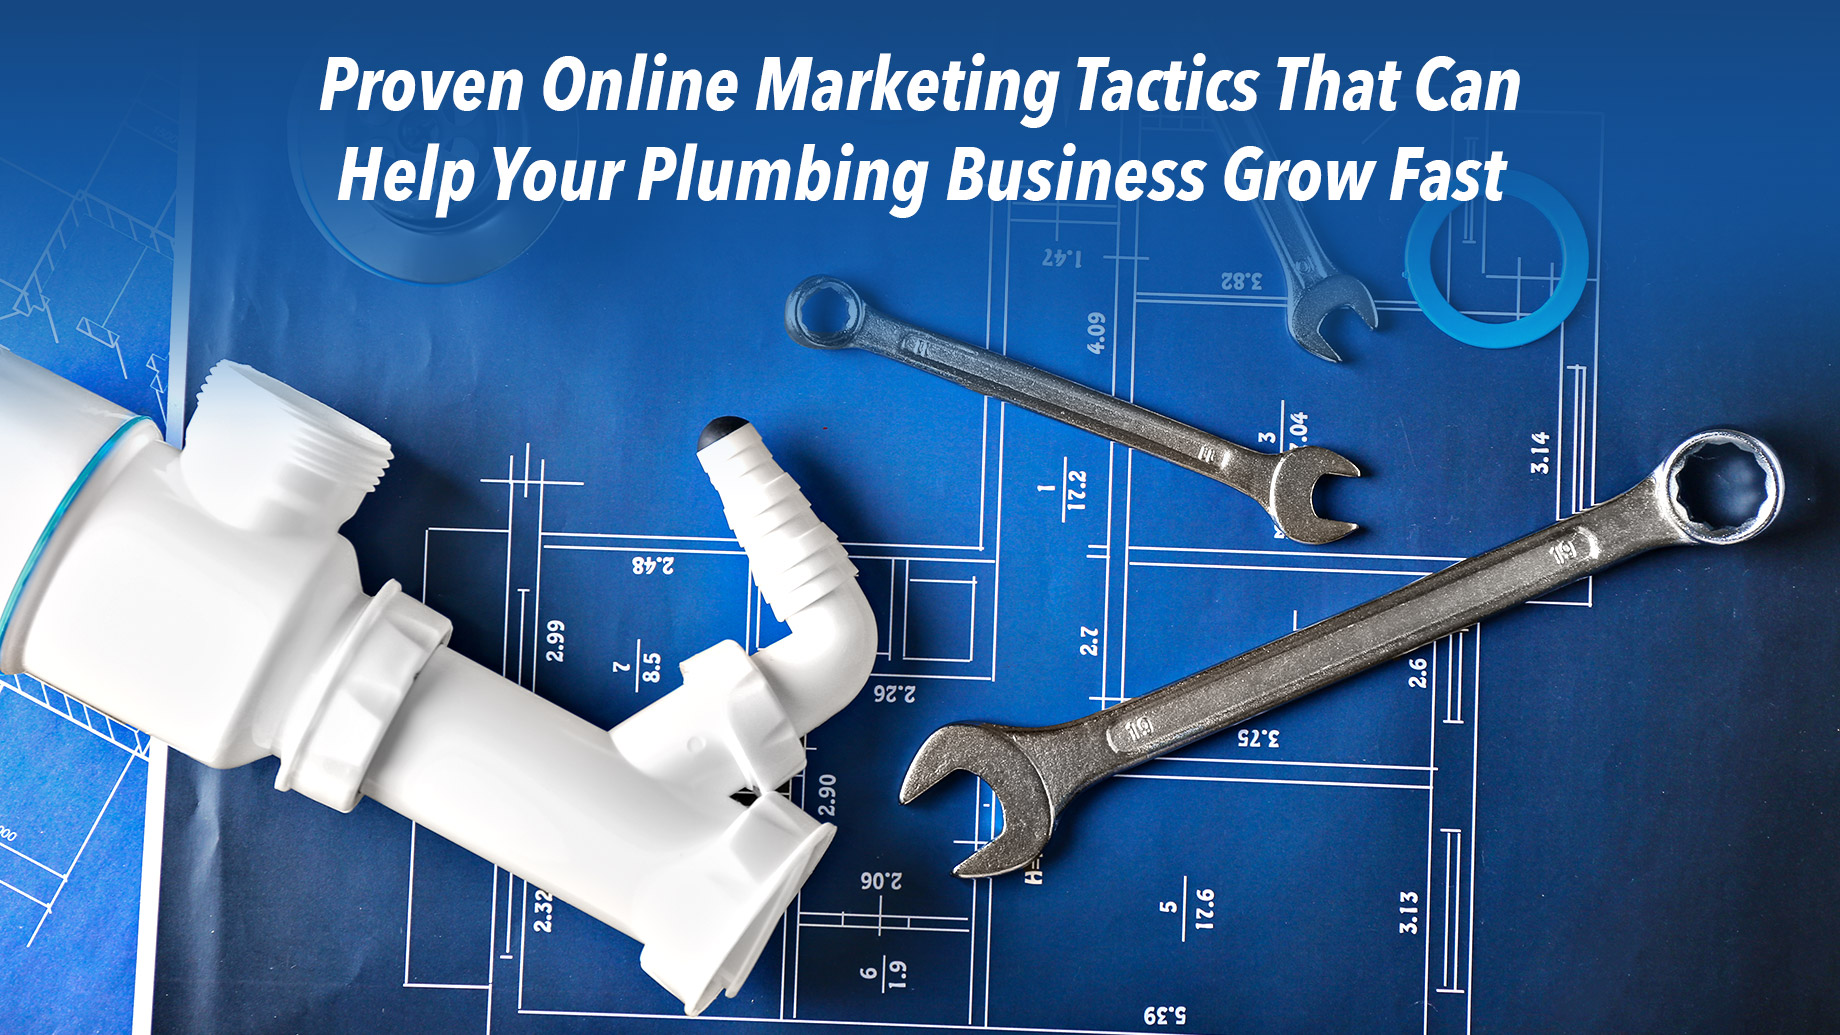 Proven Online Marketing Tactics That Can Help Your Plumbing Business Grow Fast